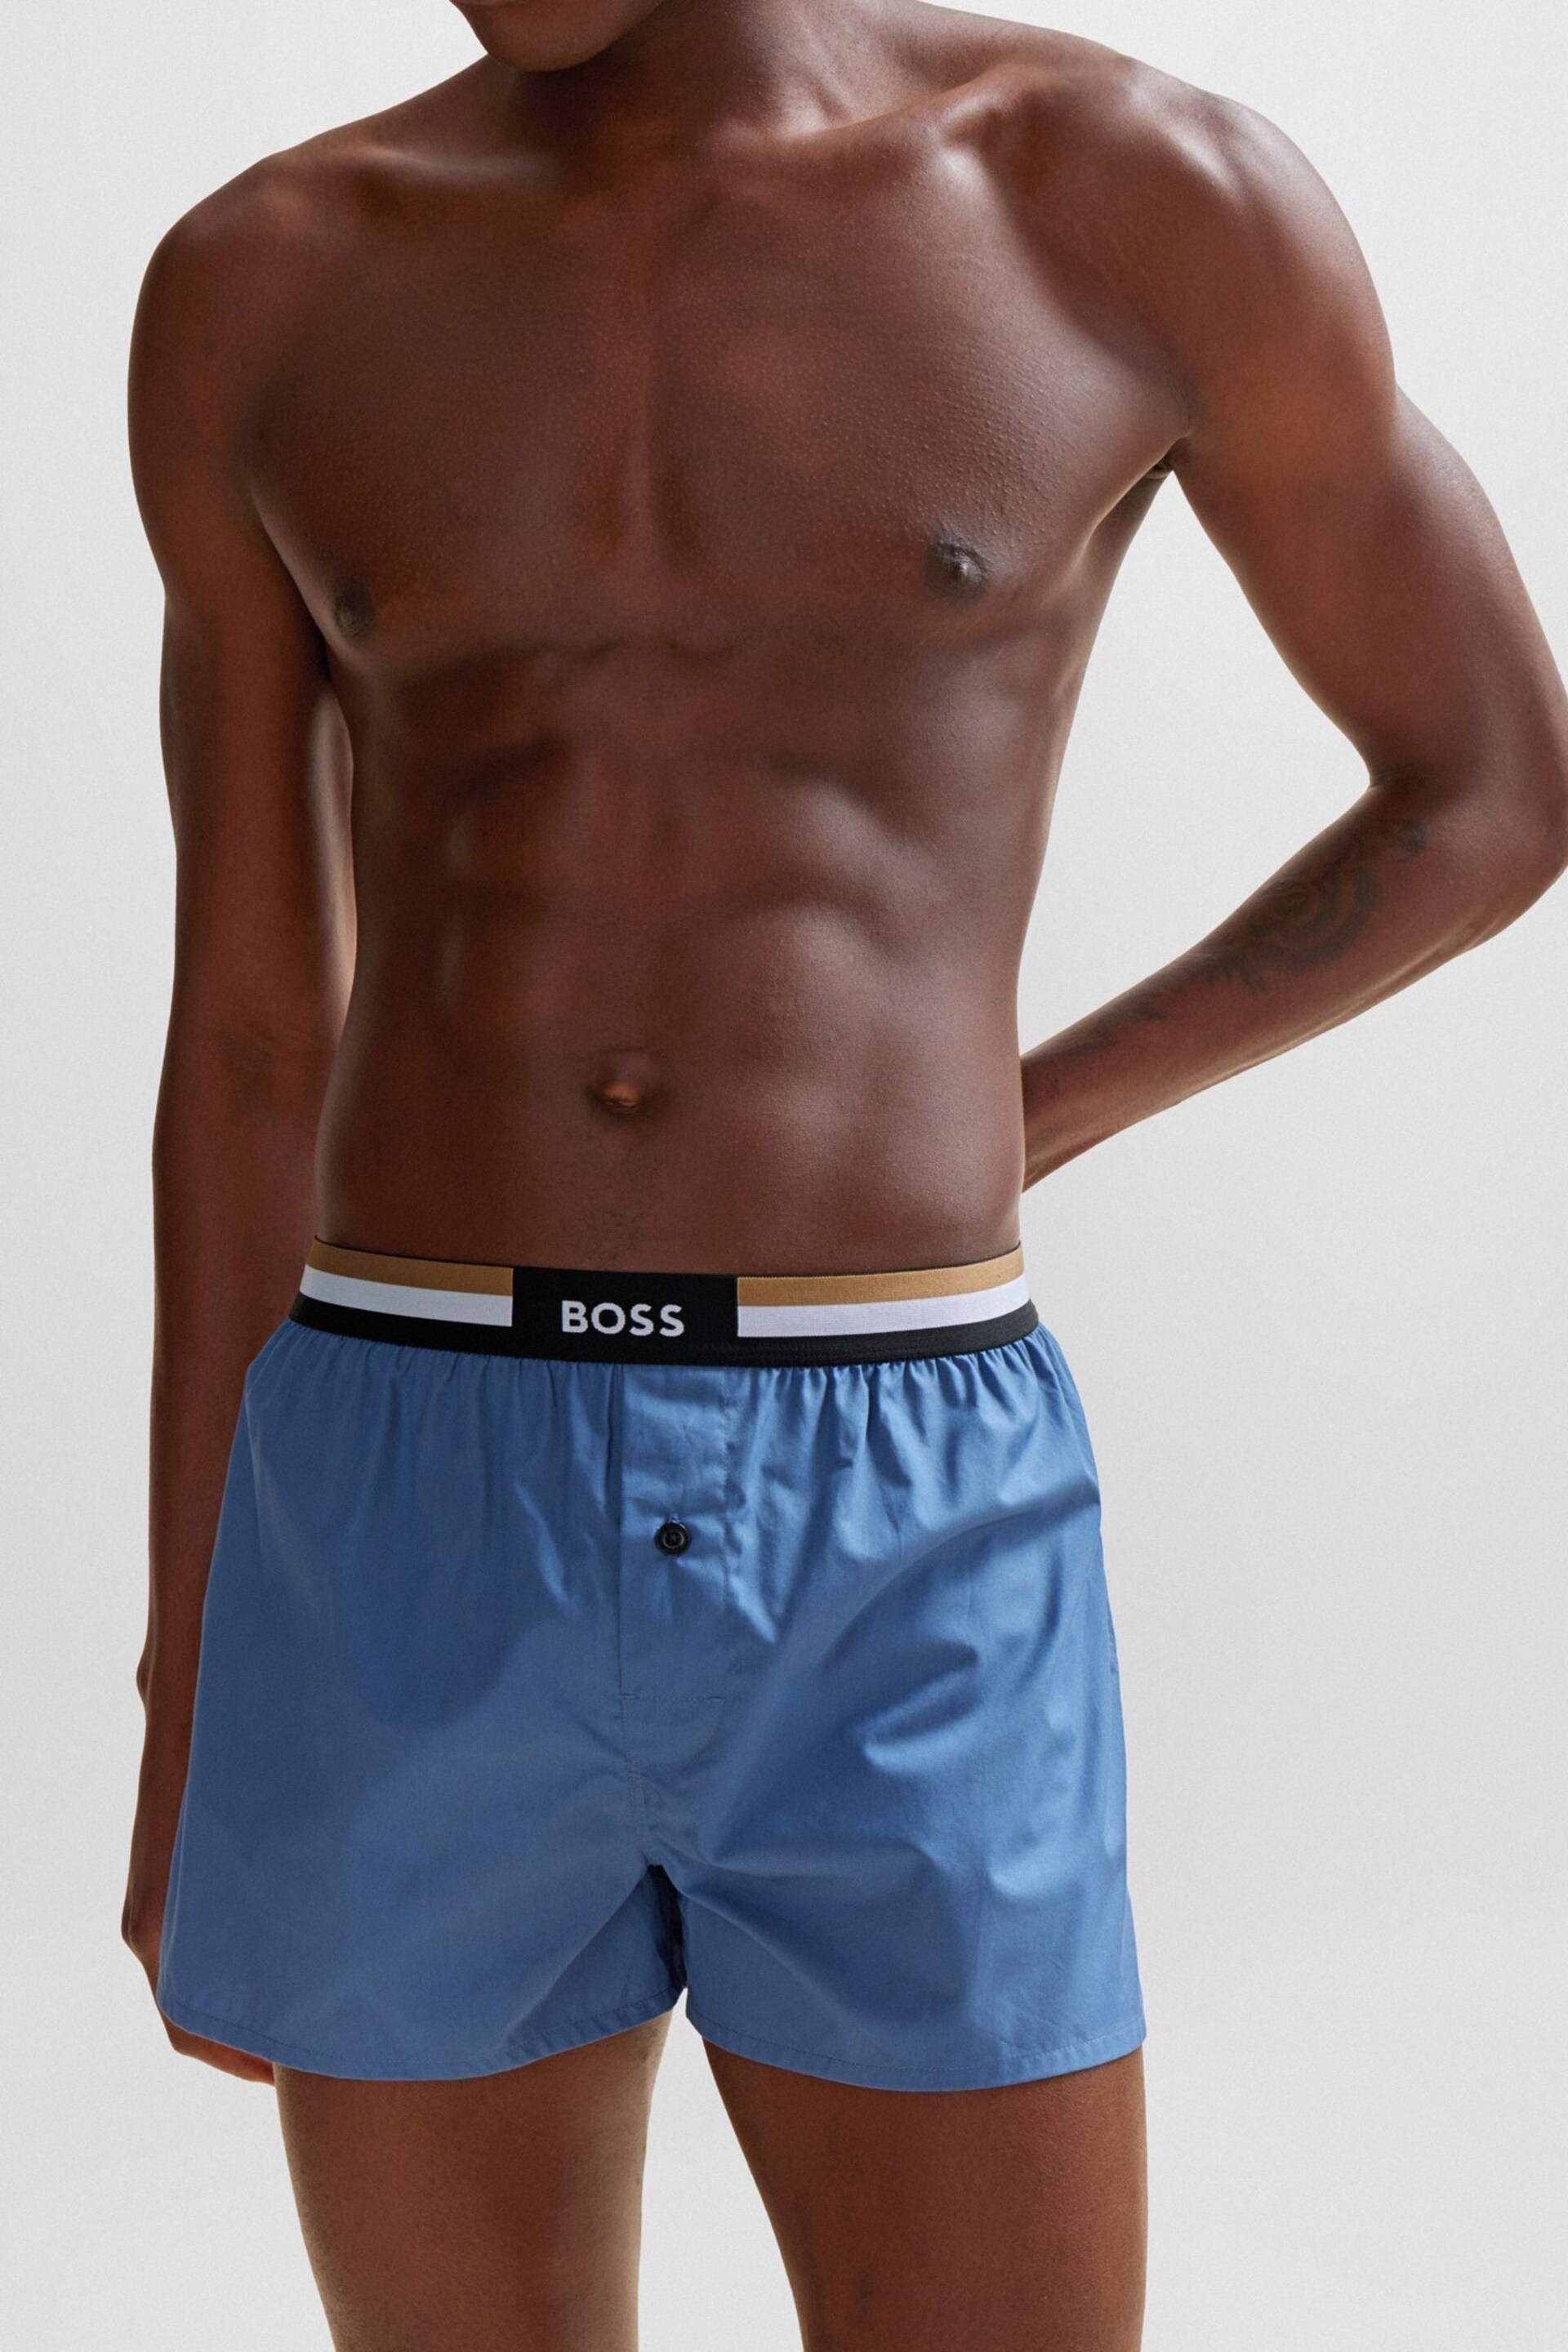 BOSS Blue Of Cotton Pyjama Shorts With Signature Waistbands 2 Pack - Image 6 of 6